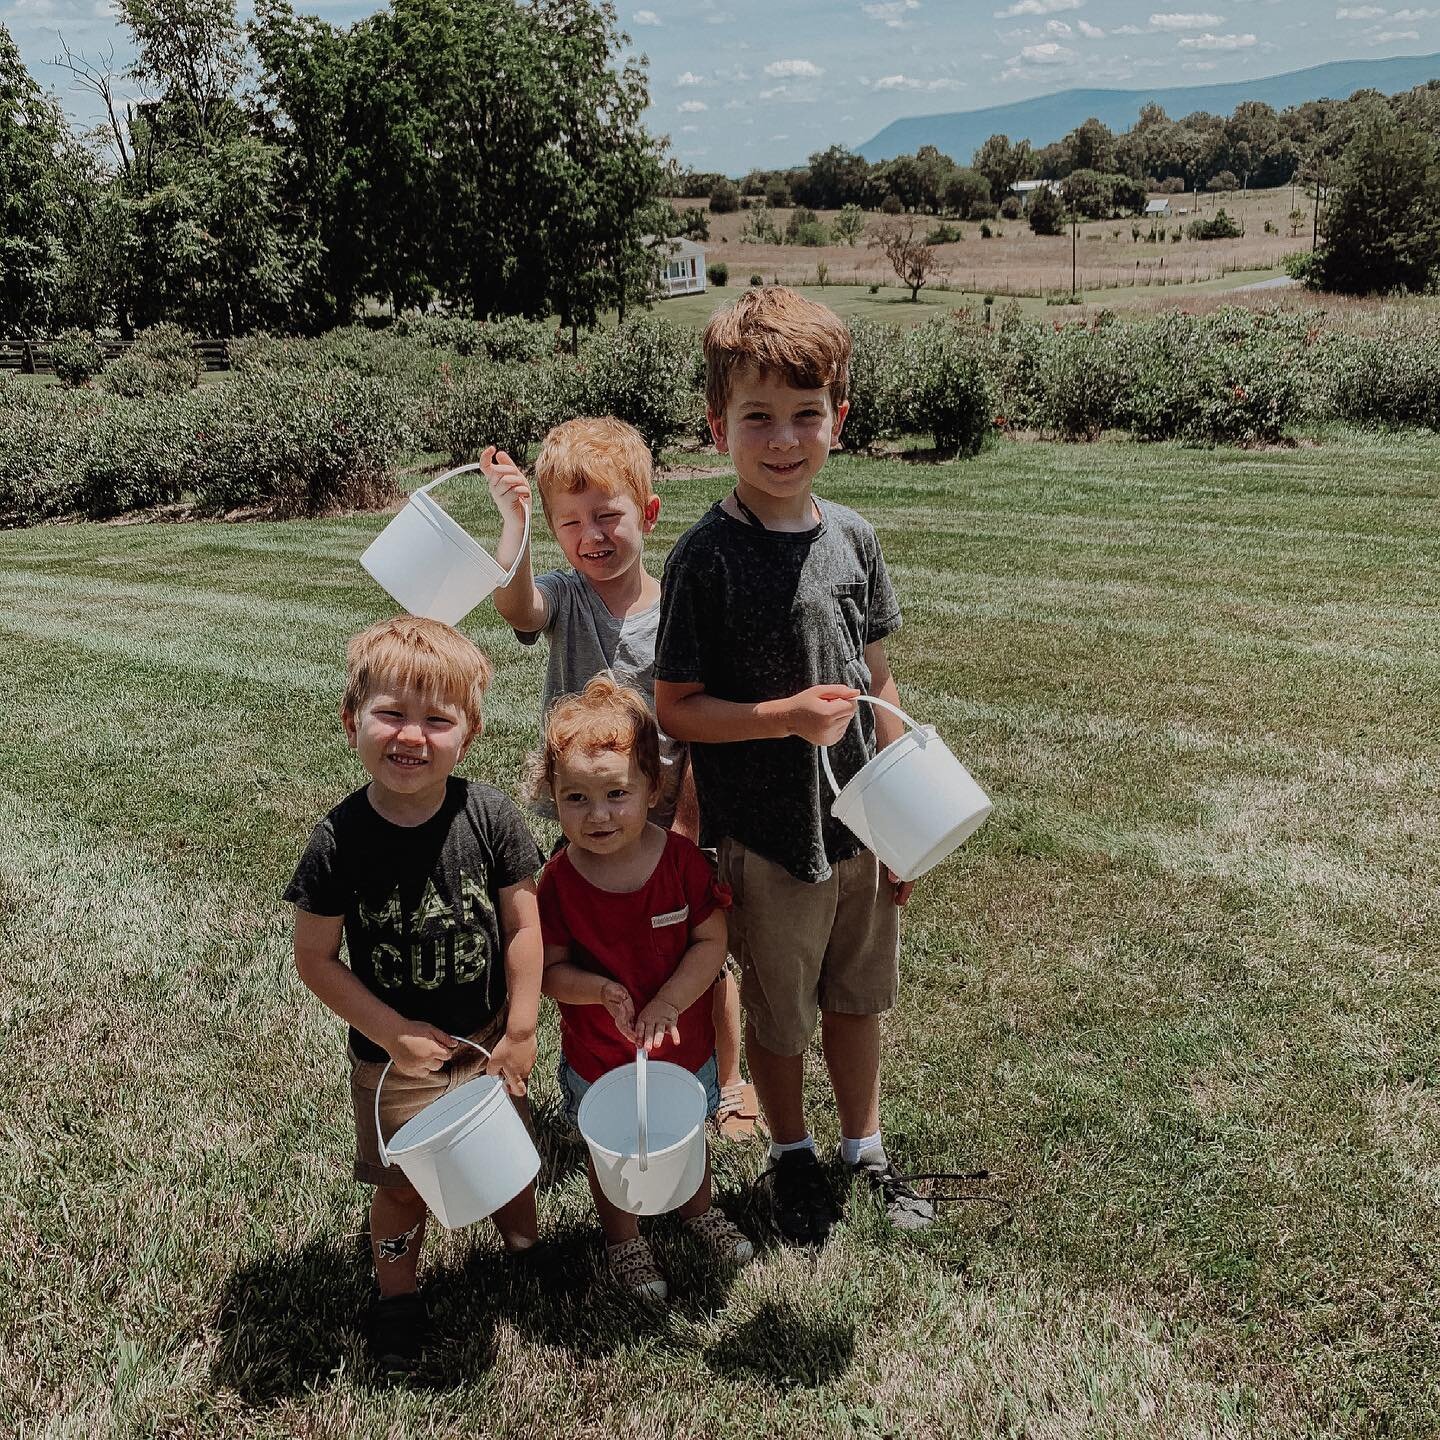 The past few days have been crazy fun. It&rsquo;s been amazing being with @carolynne_gaetano and @bridgettemacdonald and all the kids. Our kids get along so well and have the best time together. Blueberry picking, playing outside, ice cold creeks, la